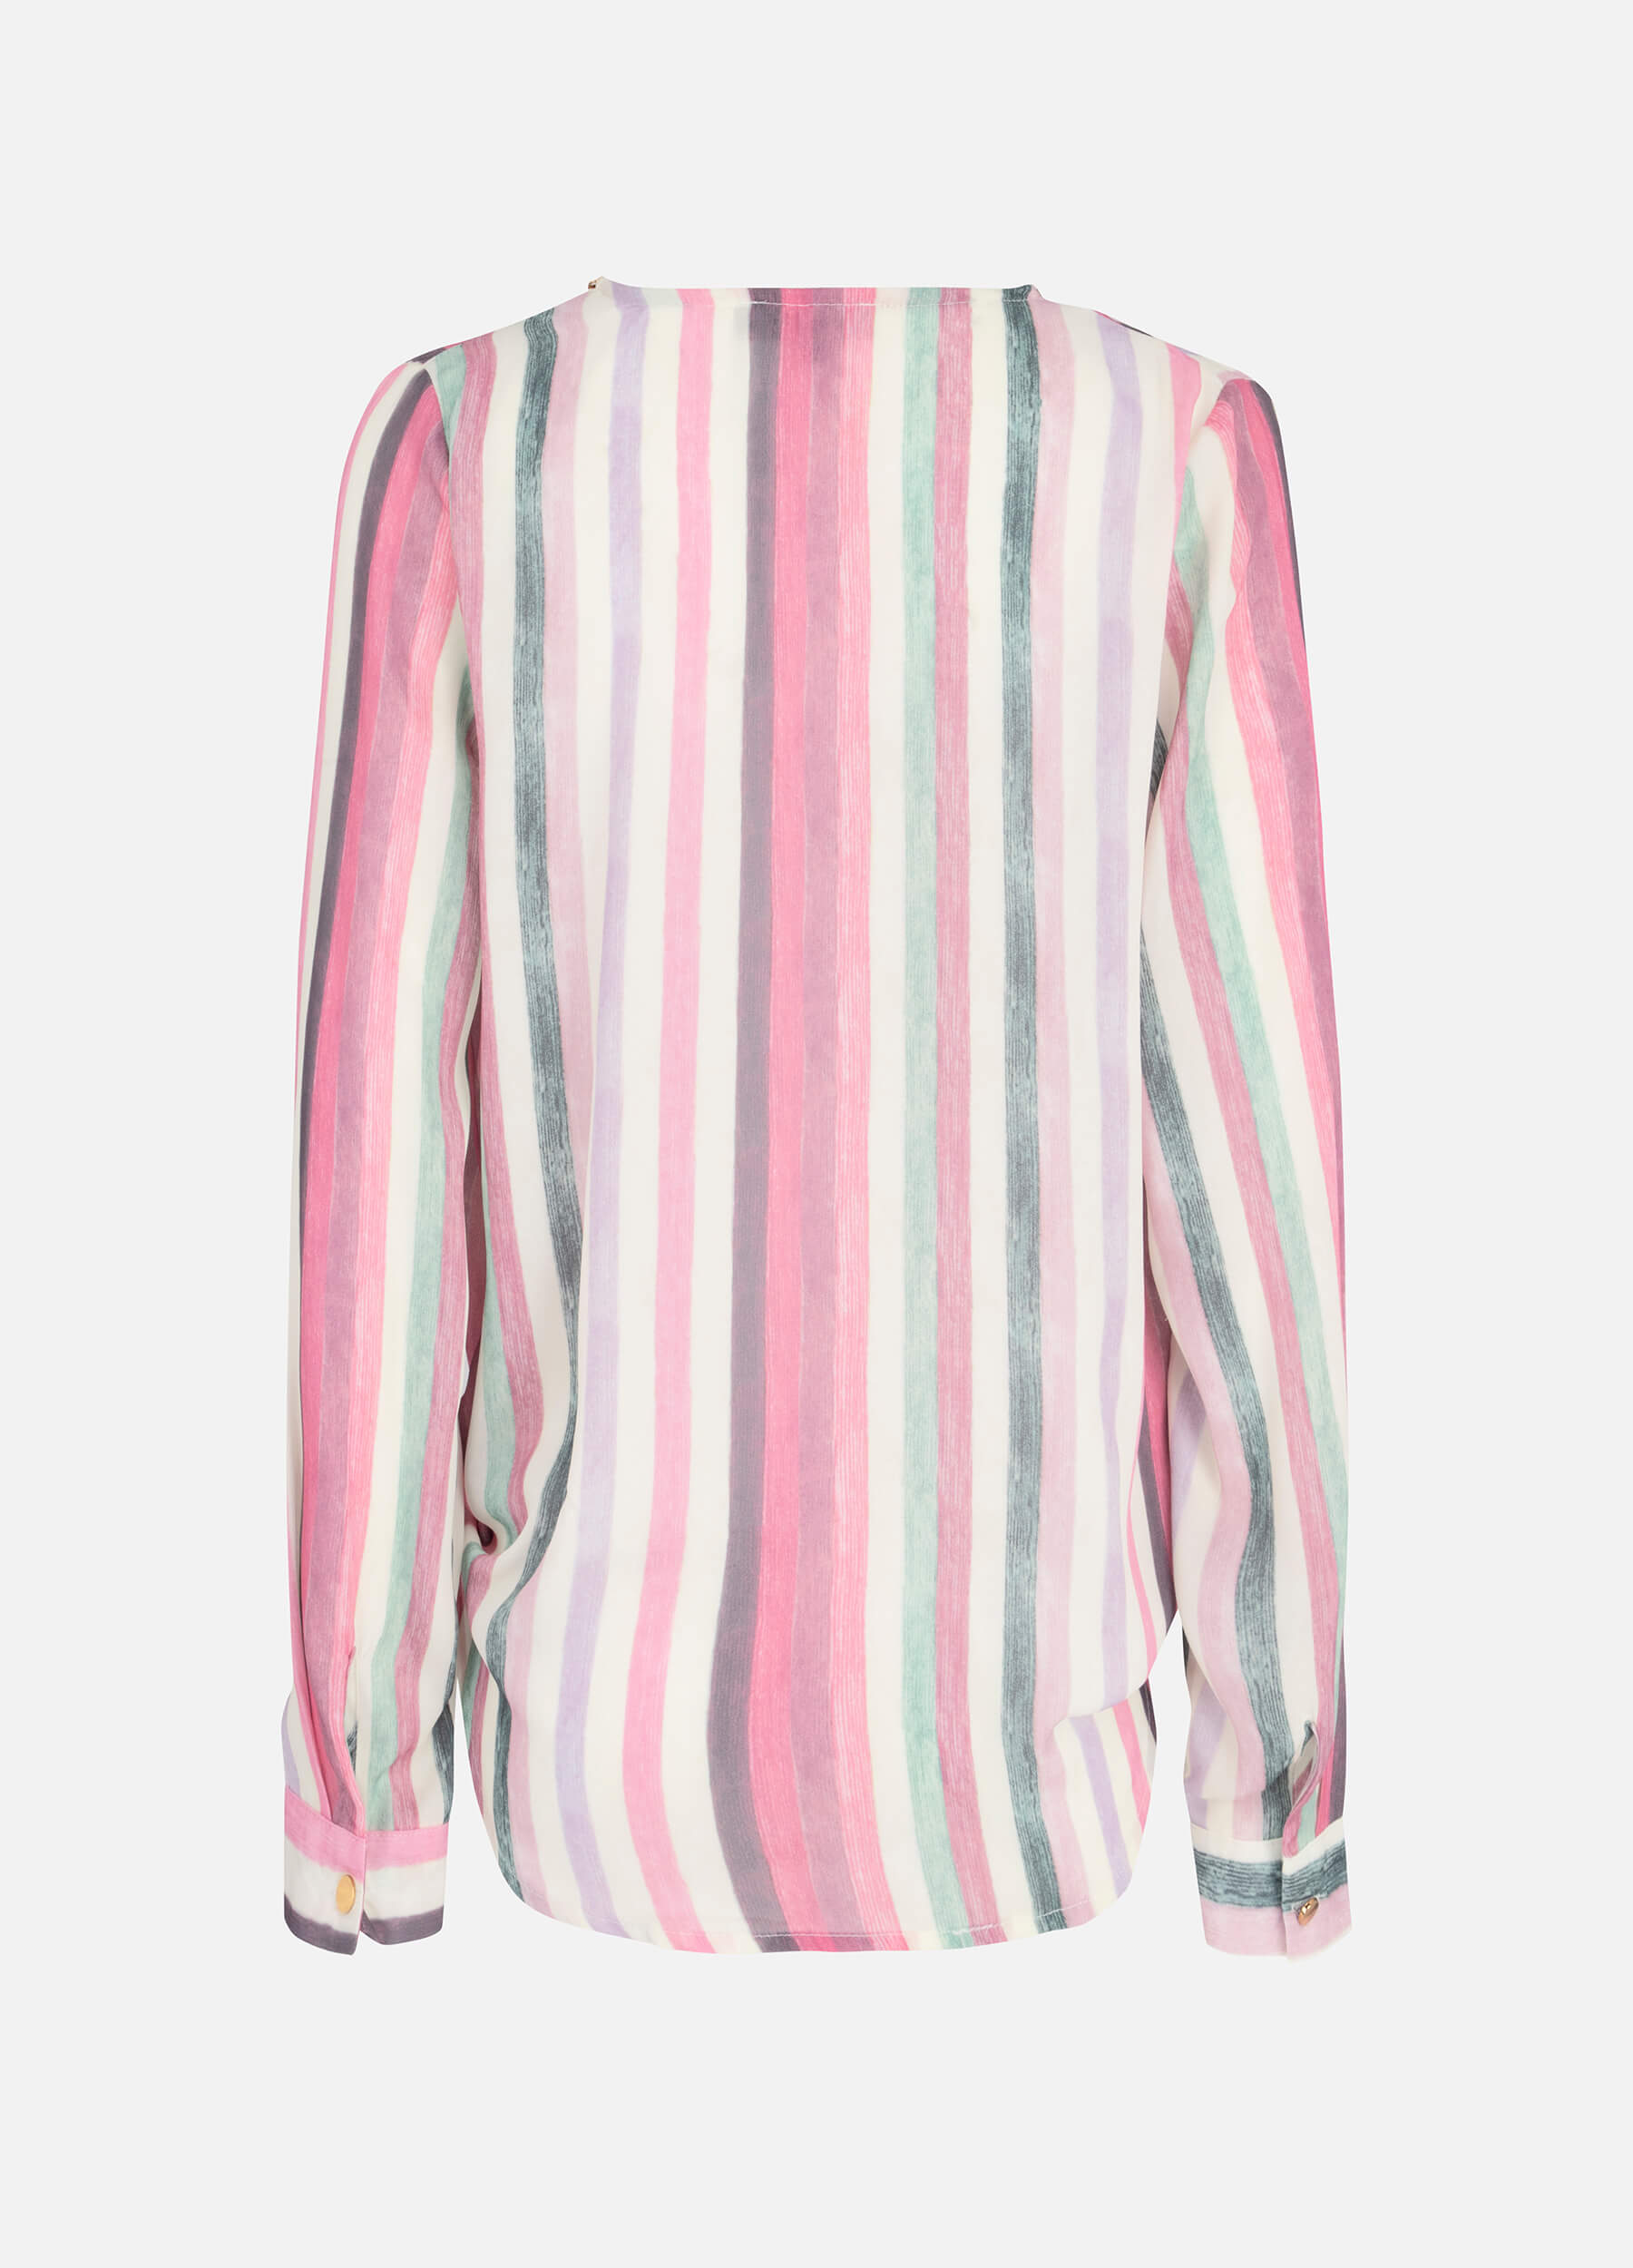 MECALA Women's Vertical Stripe Warp Long Sleeve Top With Necklace-Pink back view